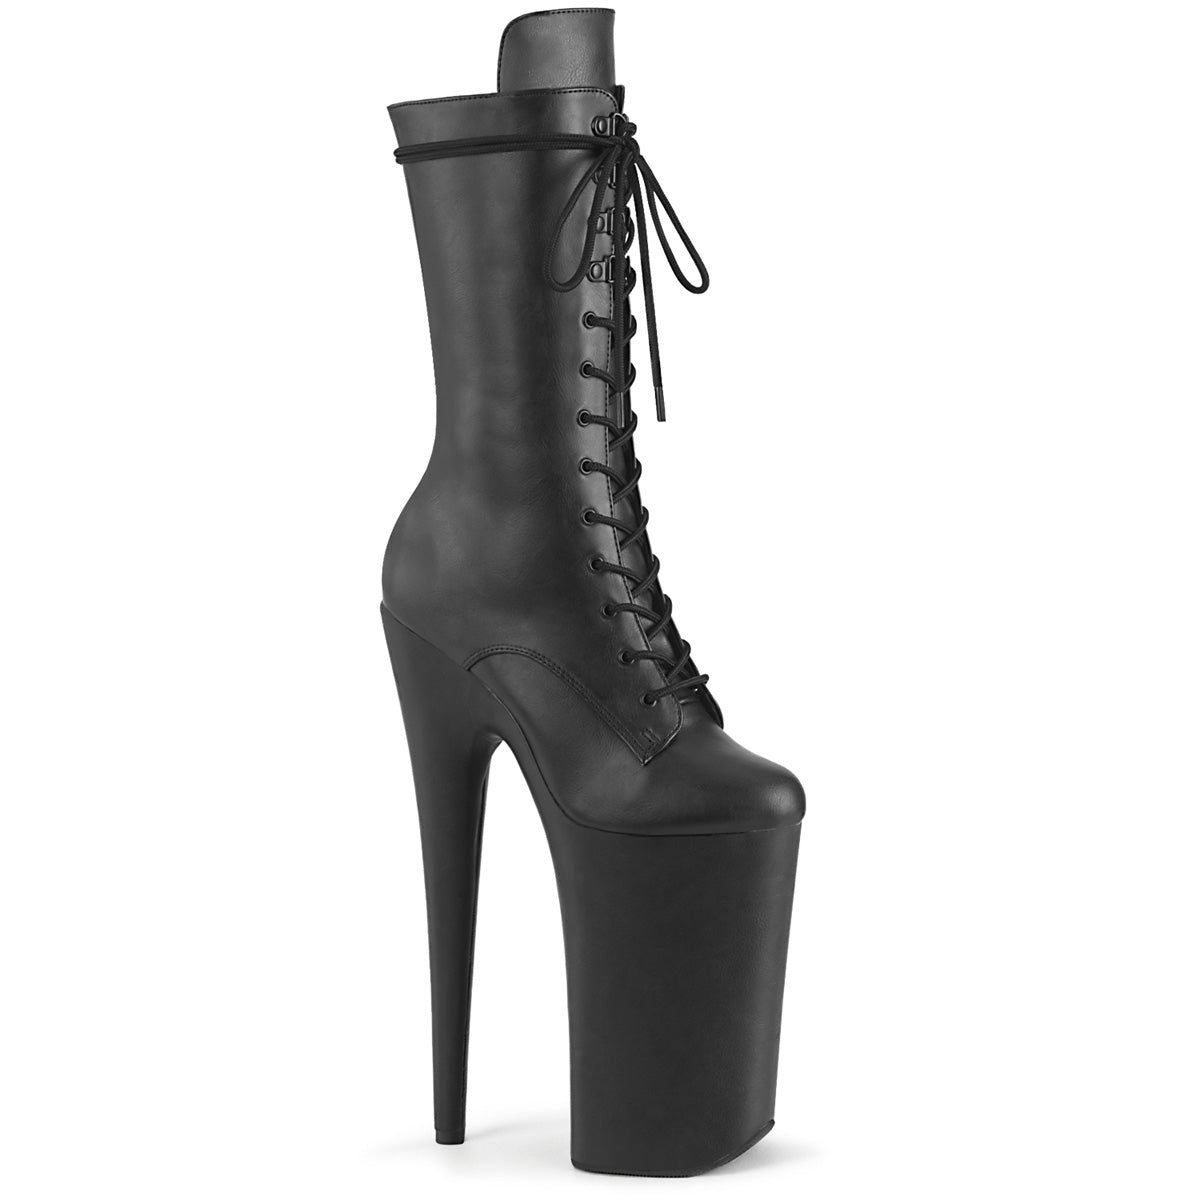 BEYOND-1050WR Black Faux Leather Boots